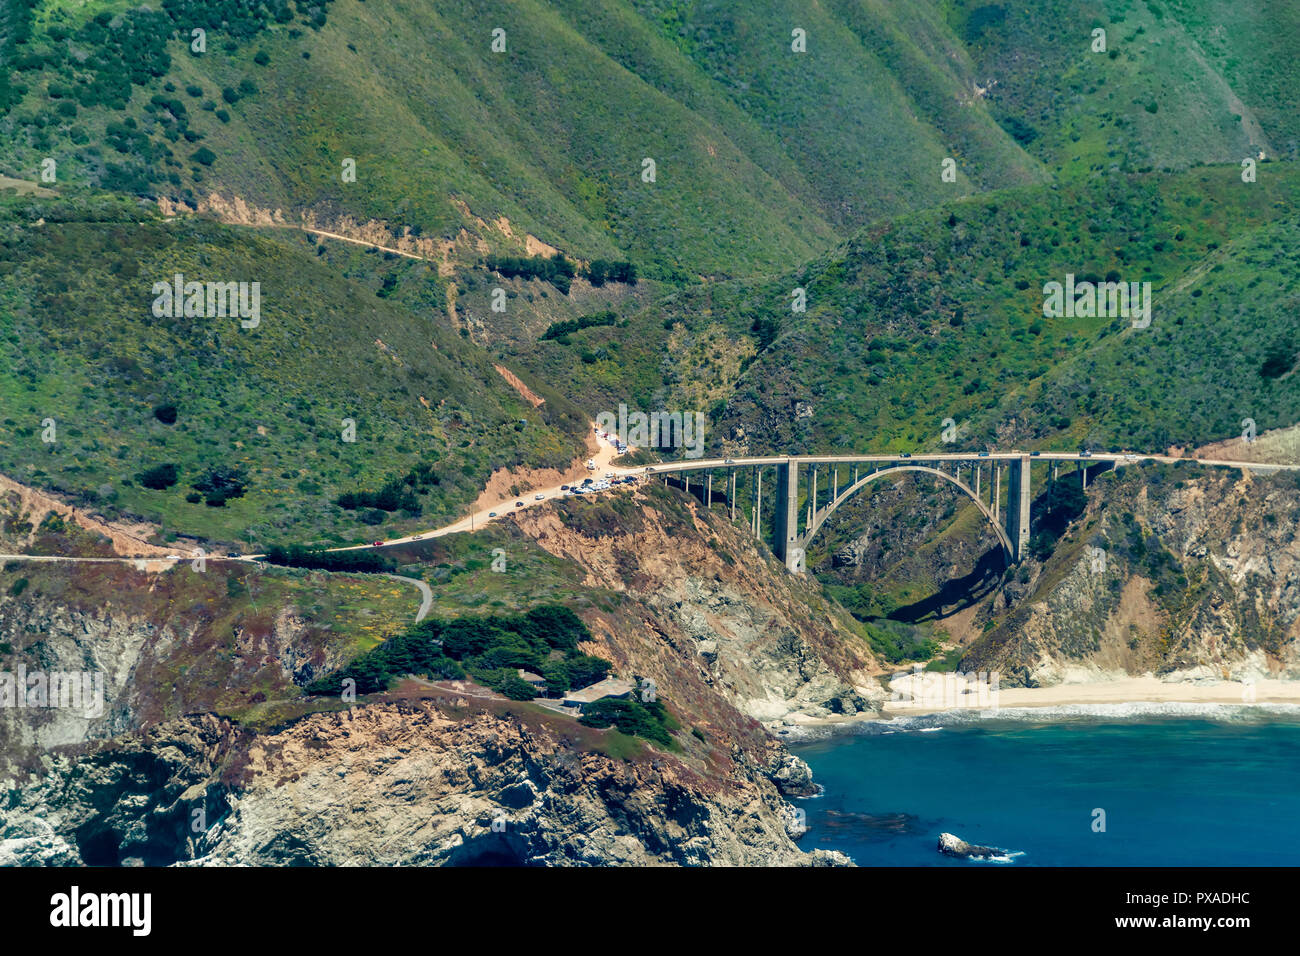 Bixby Creek Bridge on Highway 1 in California seen from the plane on a sunny day. Stock Photo